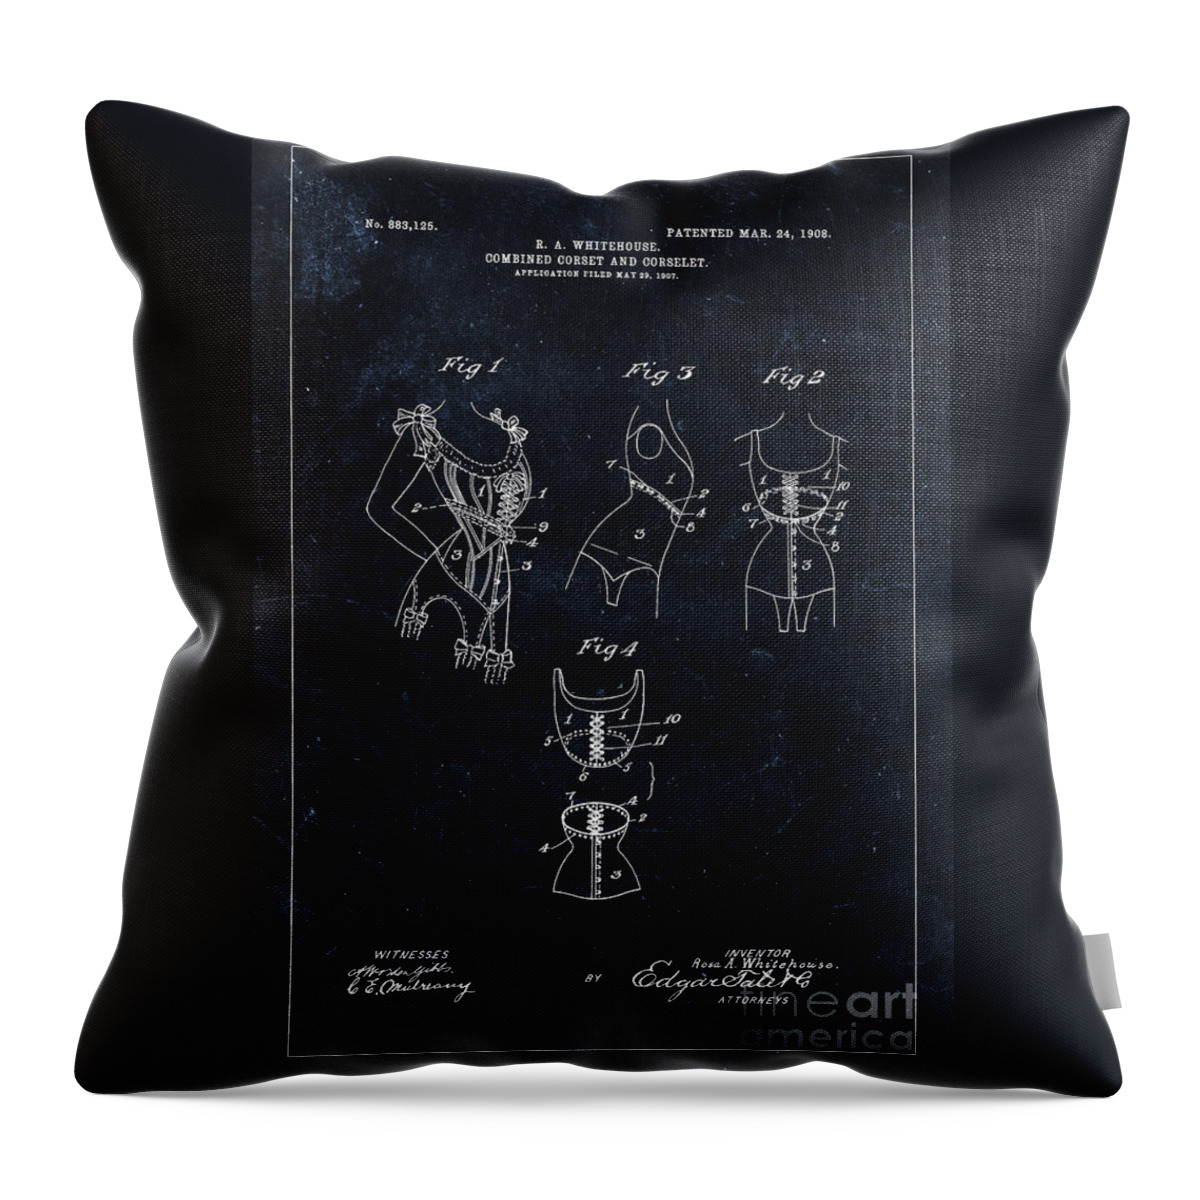 Corset Throw Pillow featuring the drawing Corset patent from 1908 - black by Delphimages Photo Creations